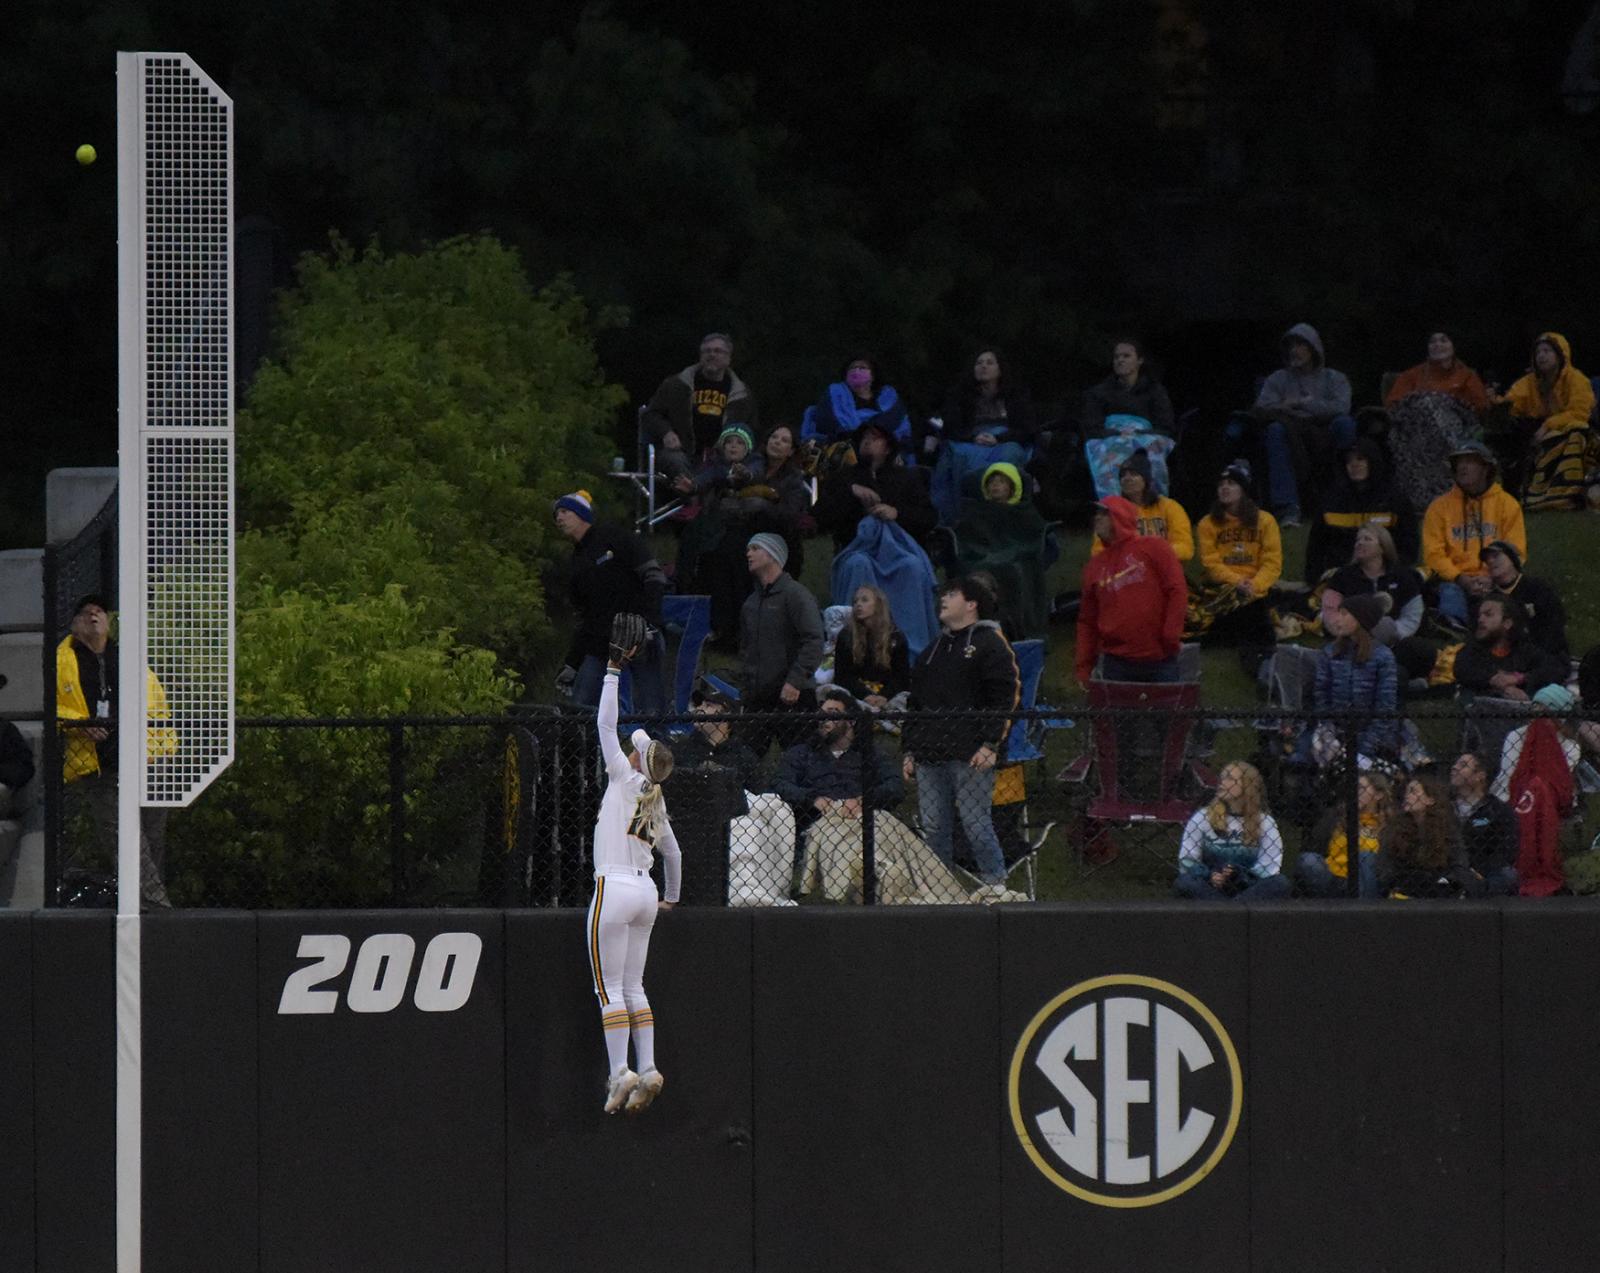 Casidy Chaumont jumps for the ball on Friday, May 28, 2021 at the Mizzou Softball Stadium in Columbia. There was a record breaking 2,632 fans in attendance for the game.